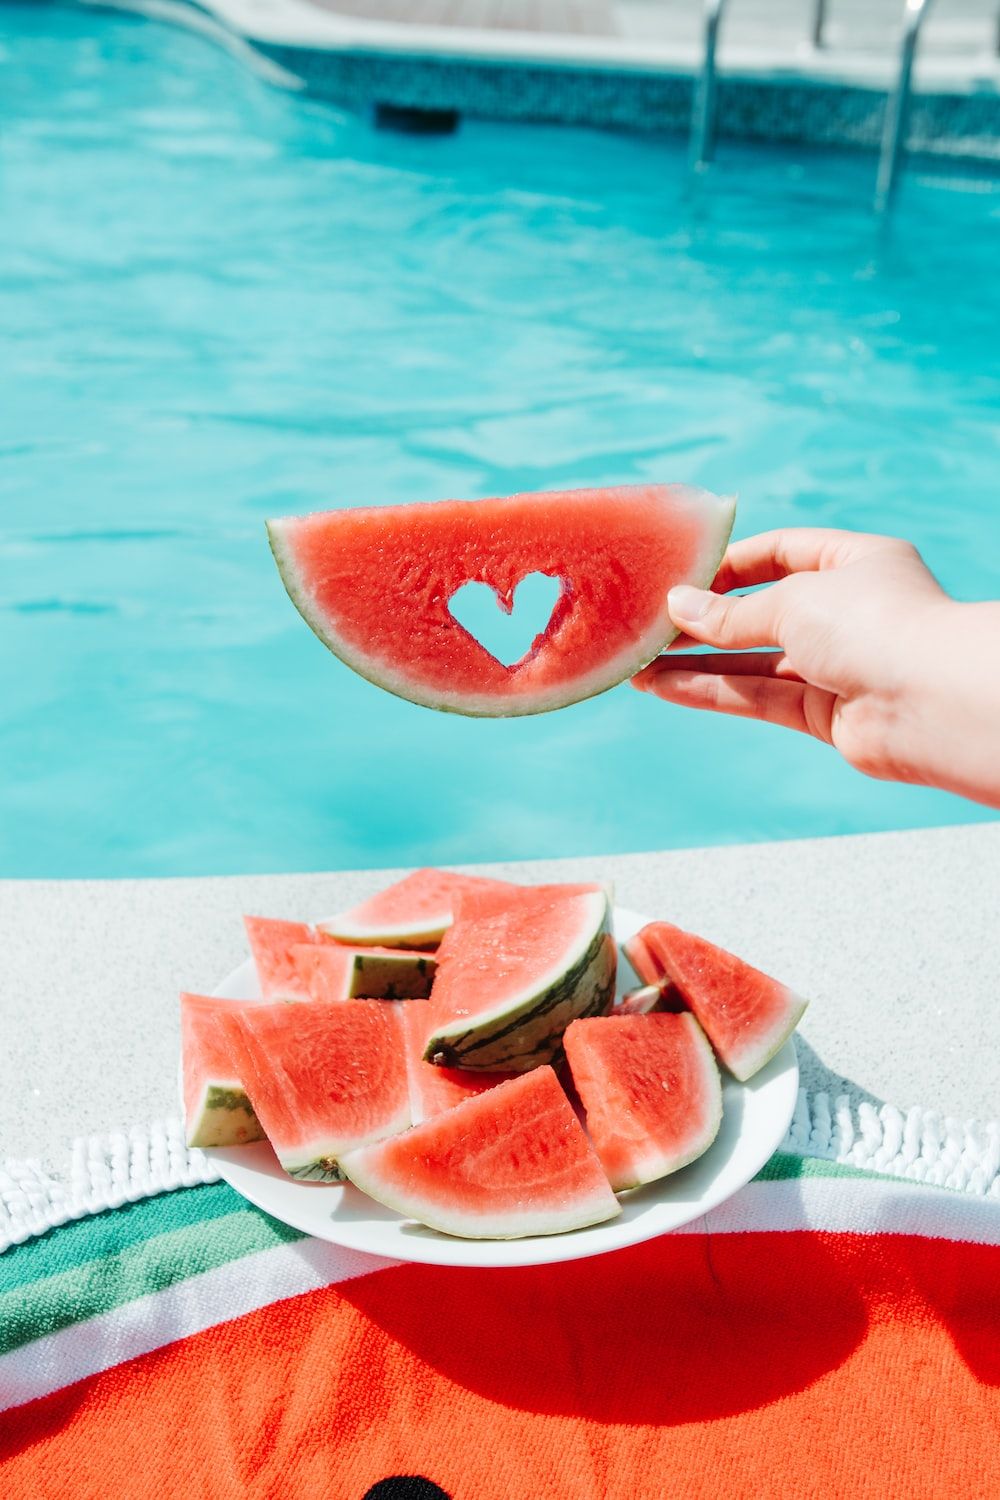 A person holding watermelon slices in front of the pool - Watermelon